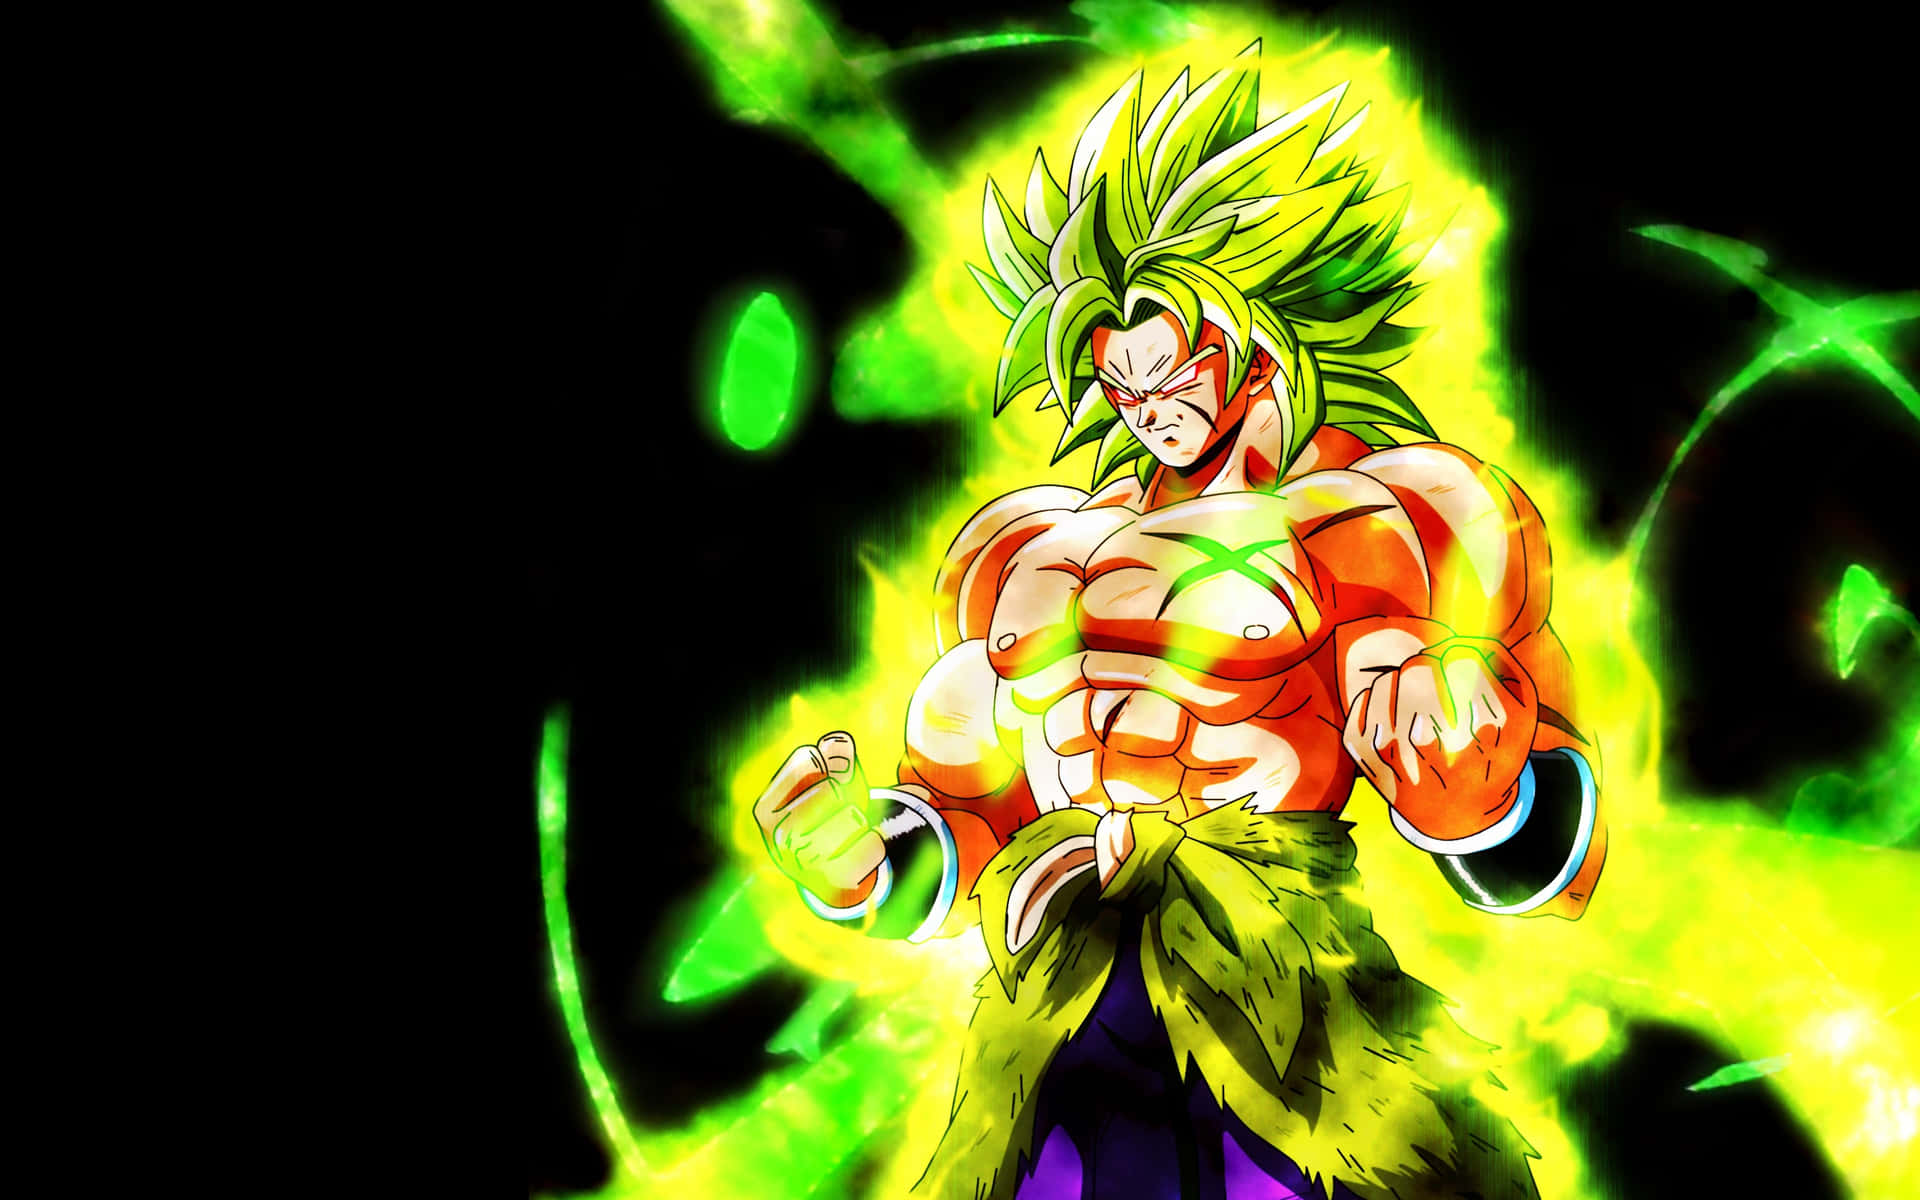 Explore the Legendary Super Saiyan Broly's thrilling journey in 'Dragon Ball Super Broly!'